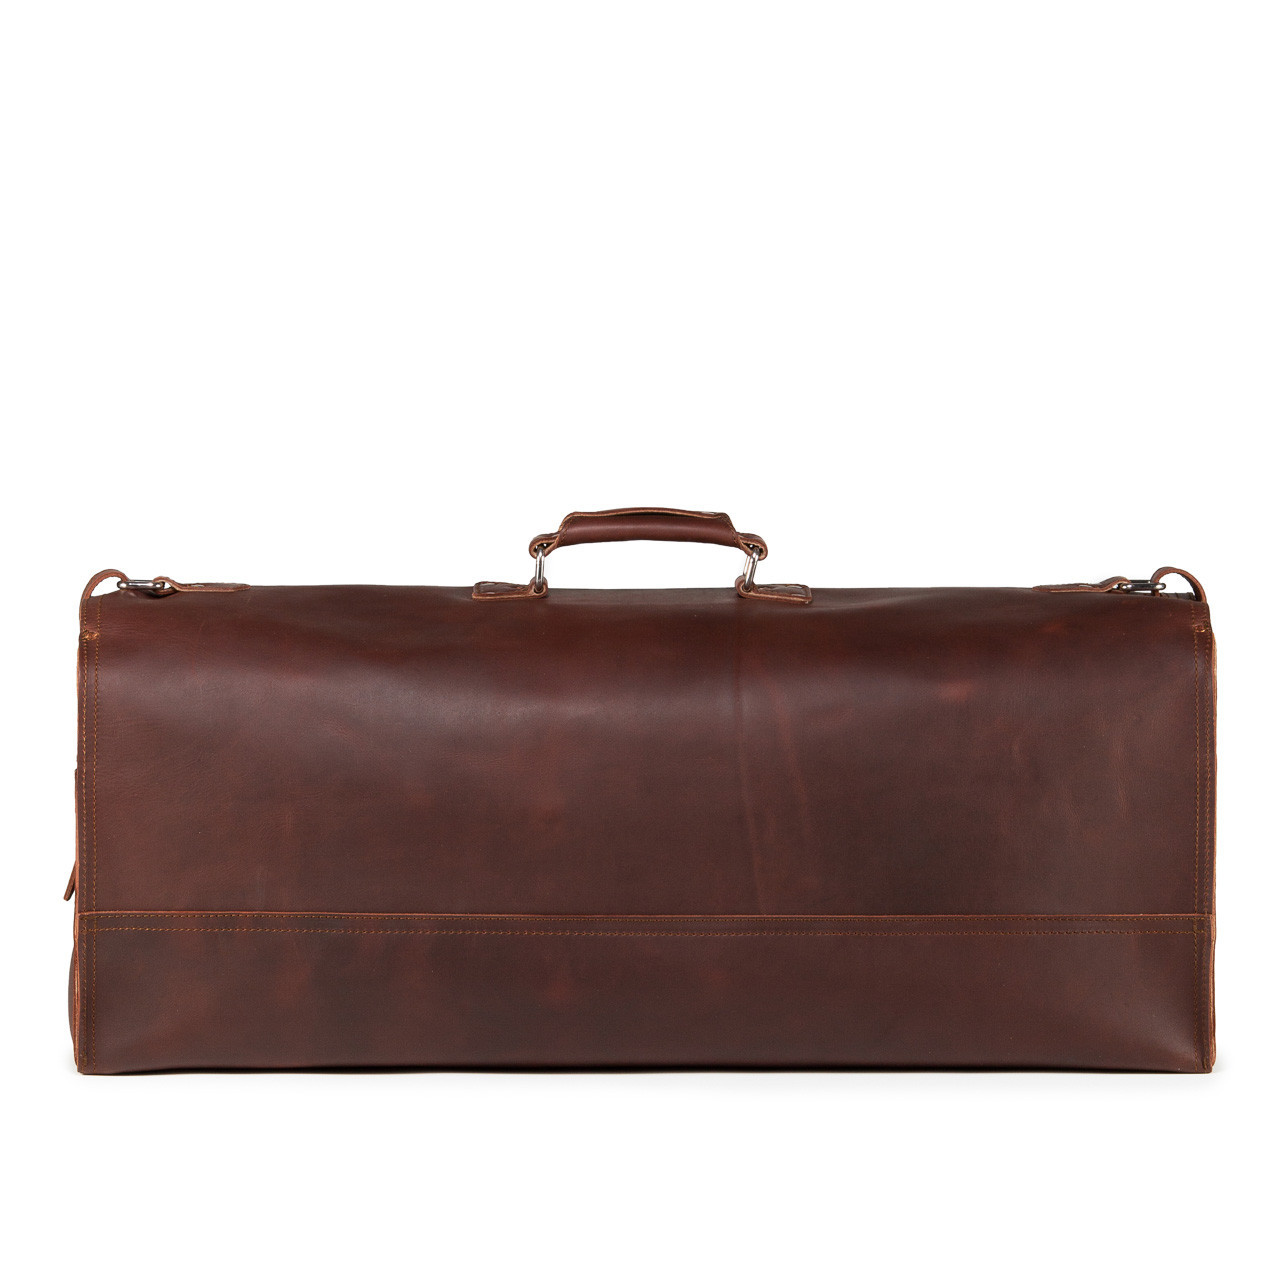 Super Large Capacity Business Travel bags Leather Big travelling